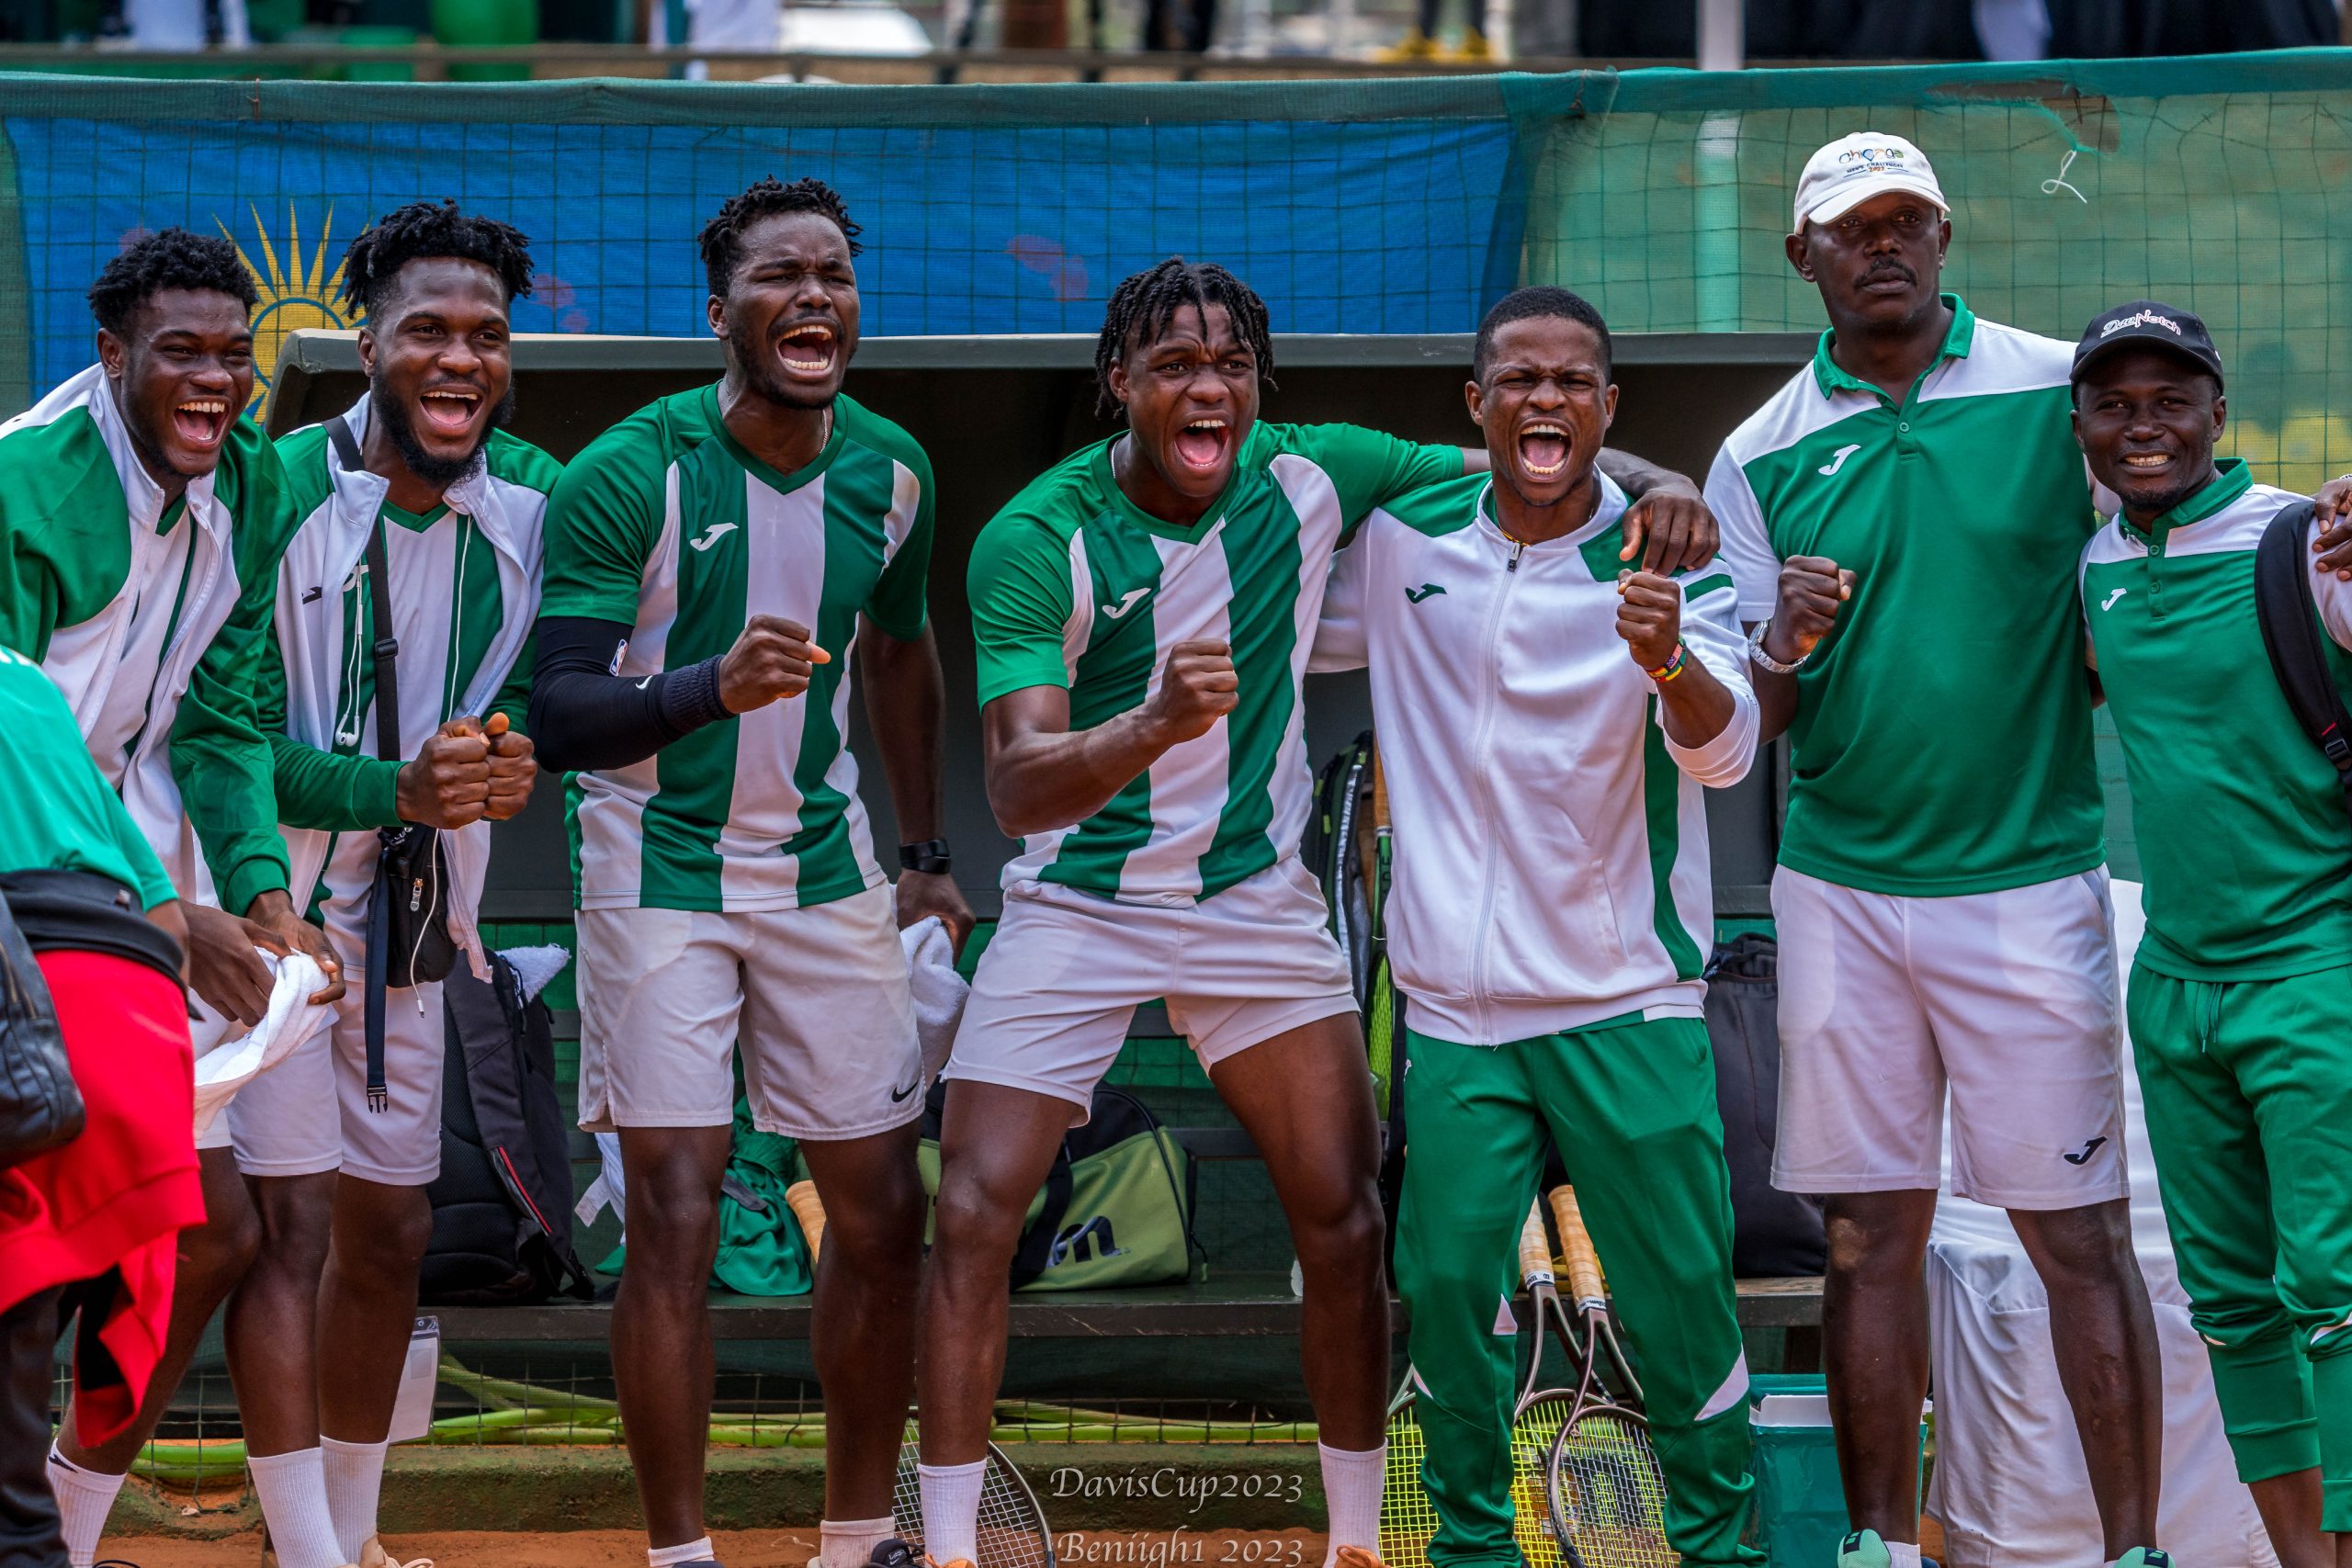 EXCLUSIVE: When Will Davis Cup Players Get Their Bonuses? NTF President Opens Up